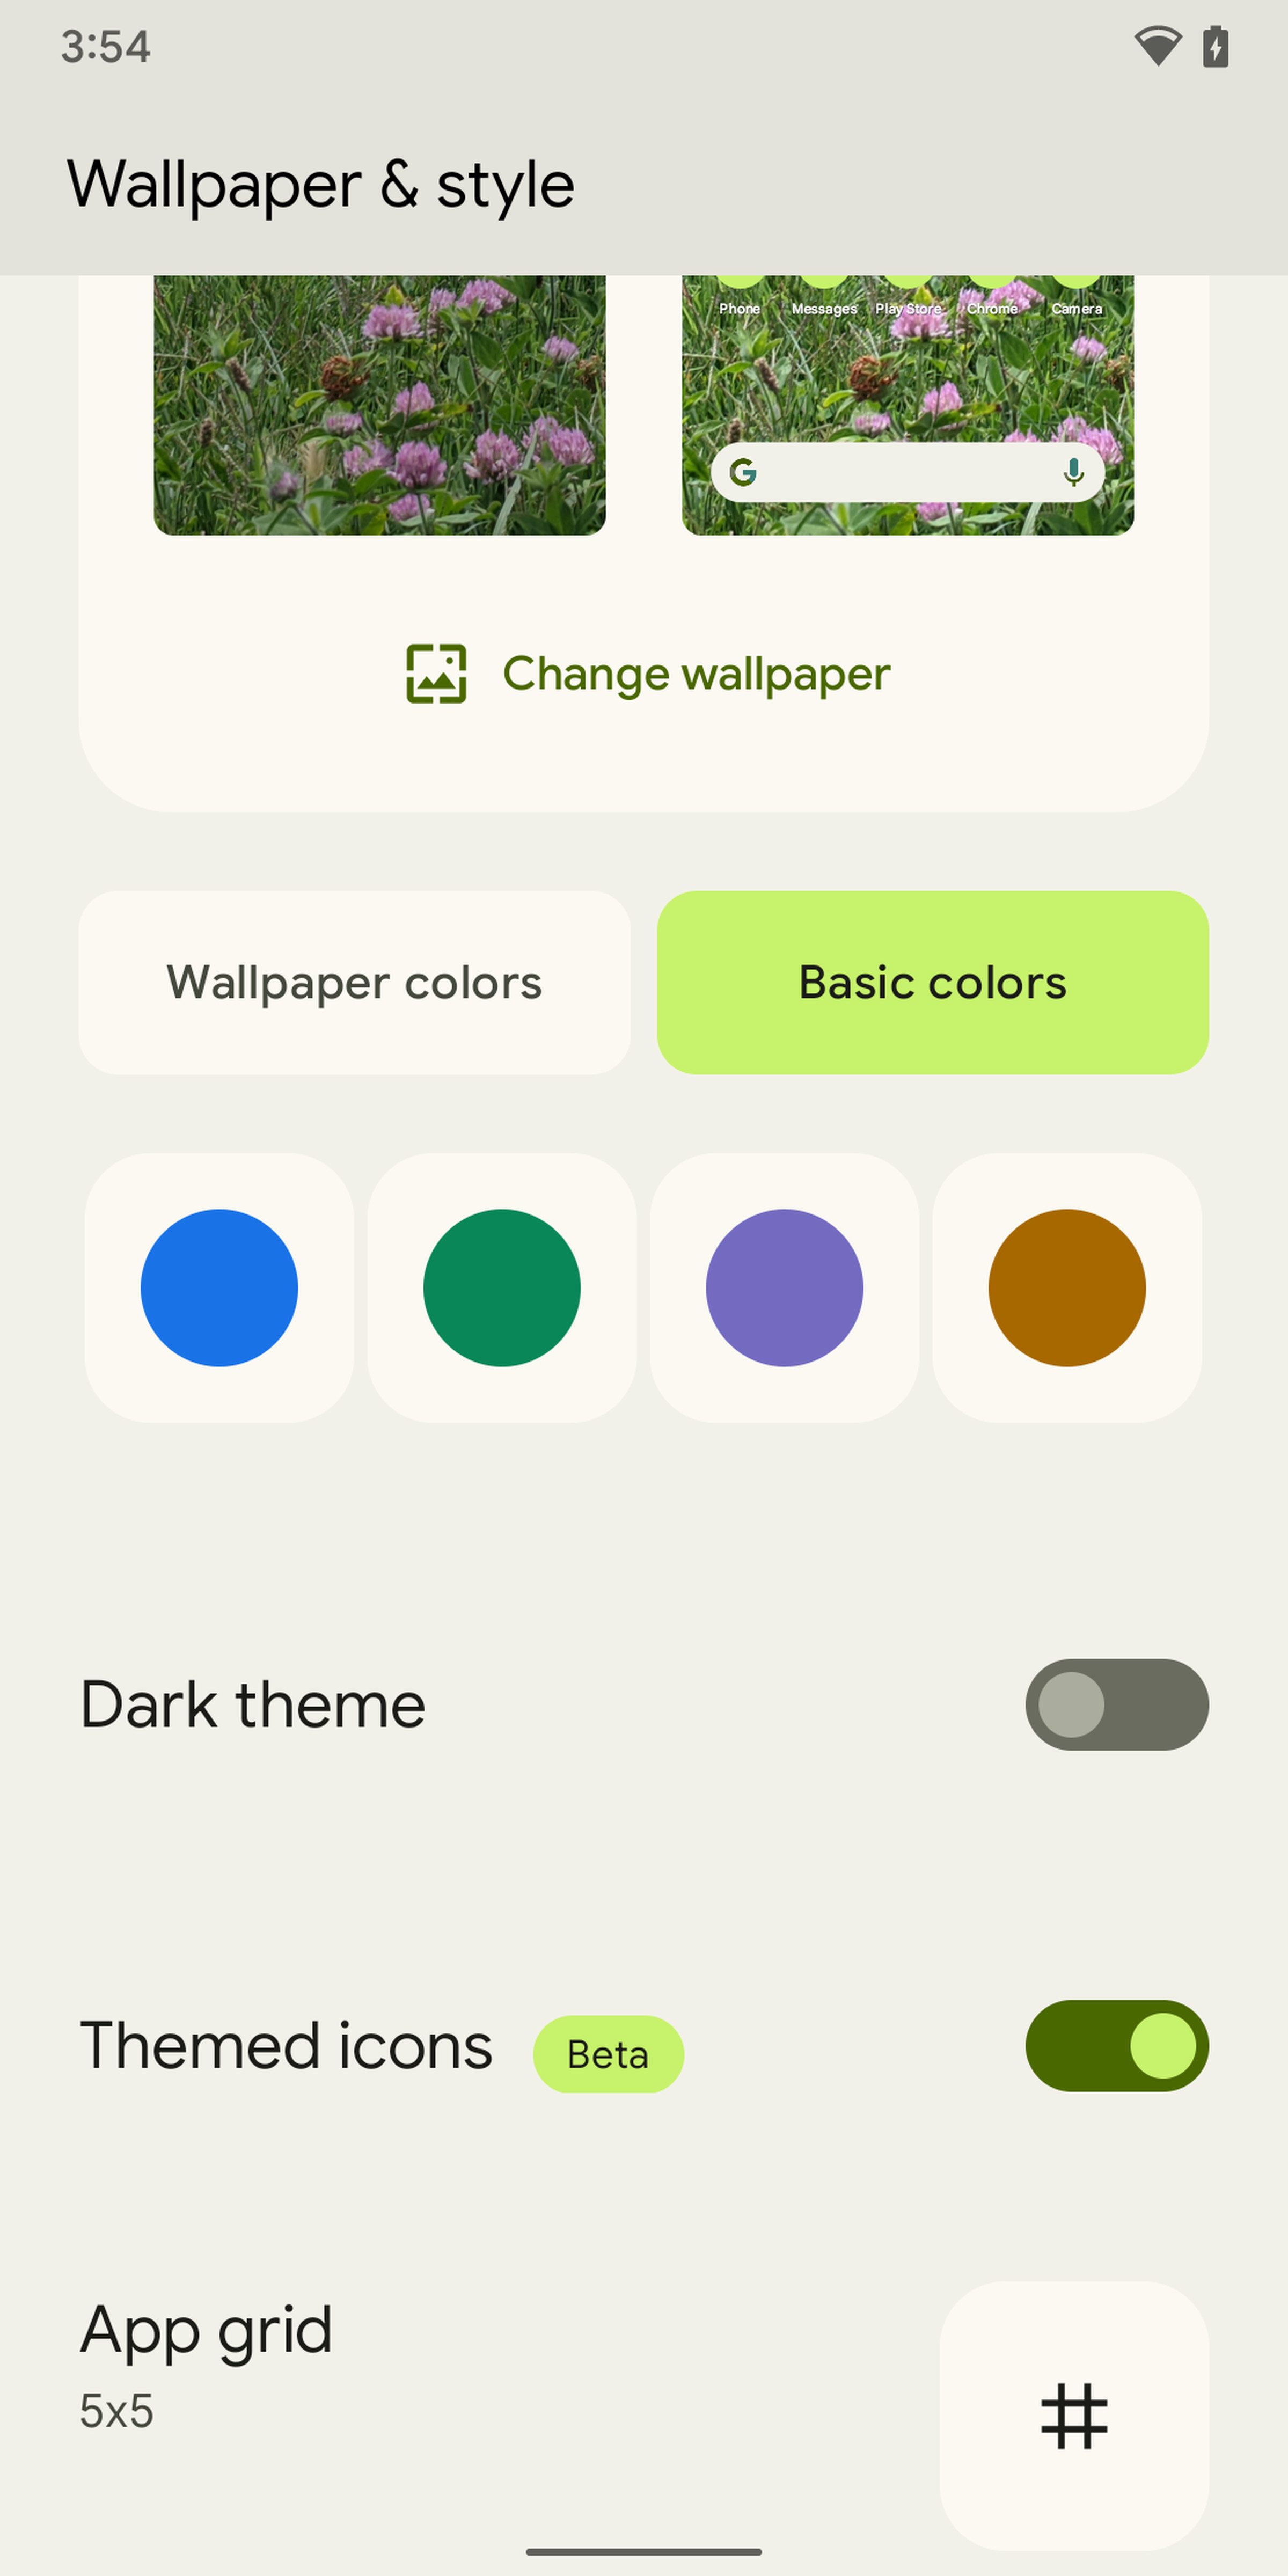 You can tweak your theme colors.